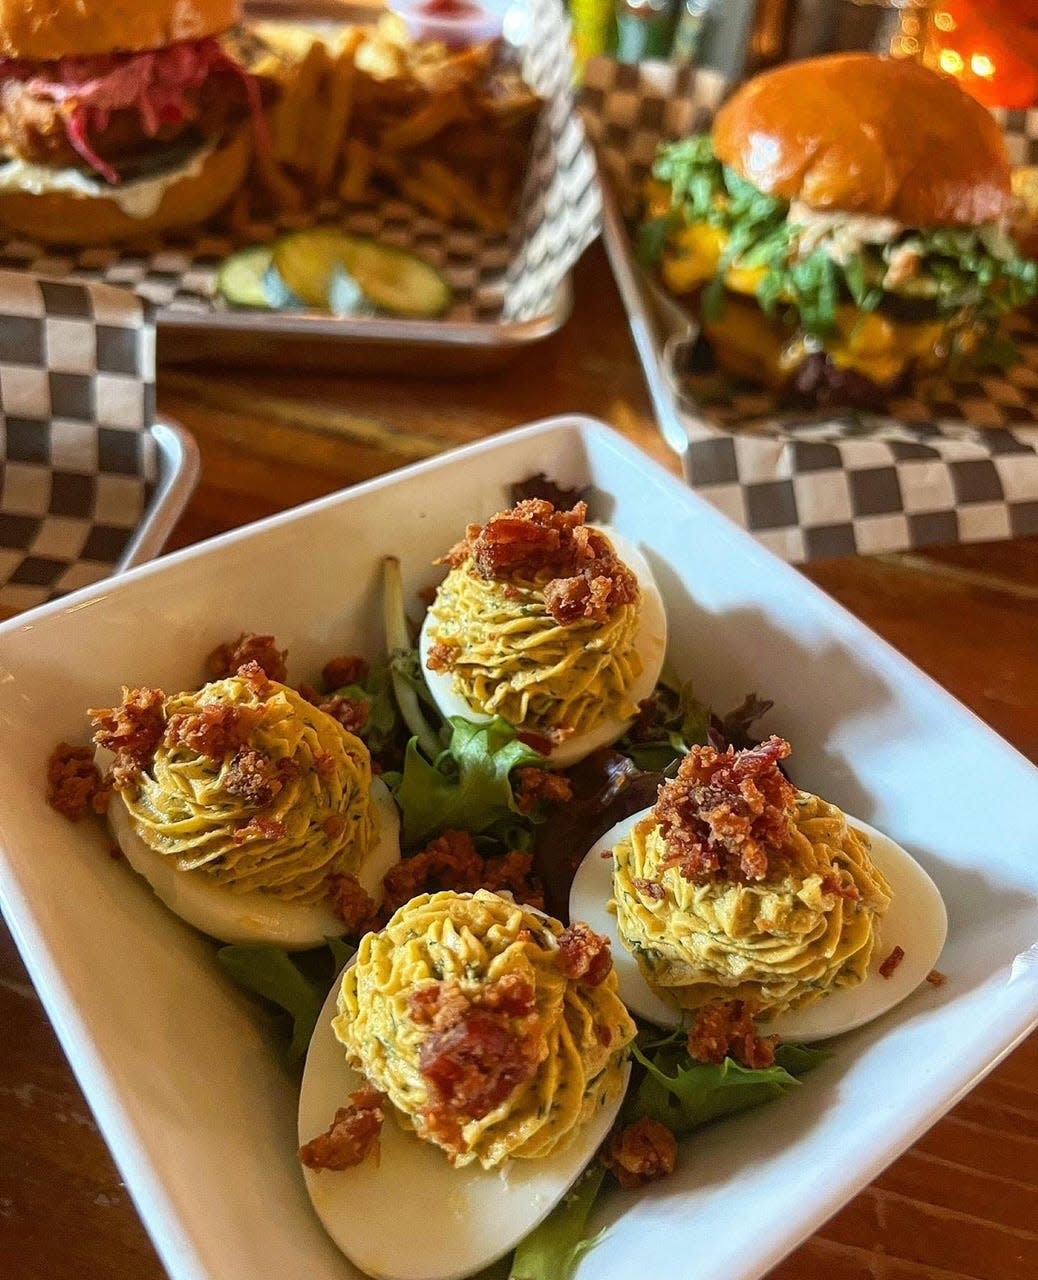 The brunch menu at Maxwell's on Main, in Doylestown Borough, includes a number of Creole-inspired dishes and appetizers, including these deviled eggs topped with pork belly cracklins.